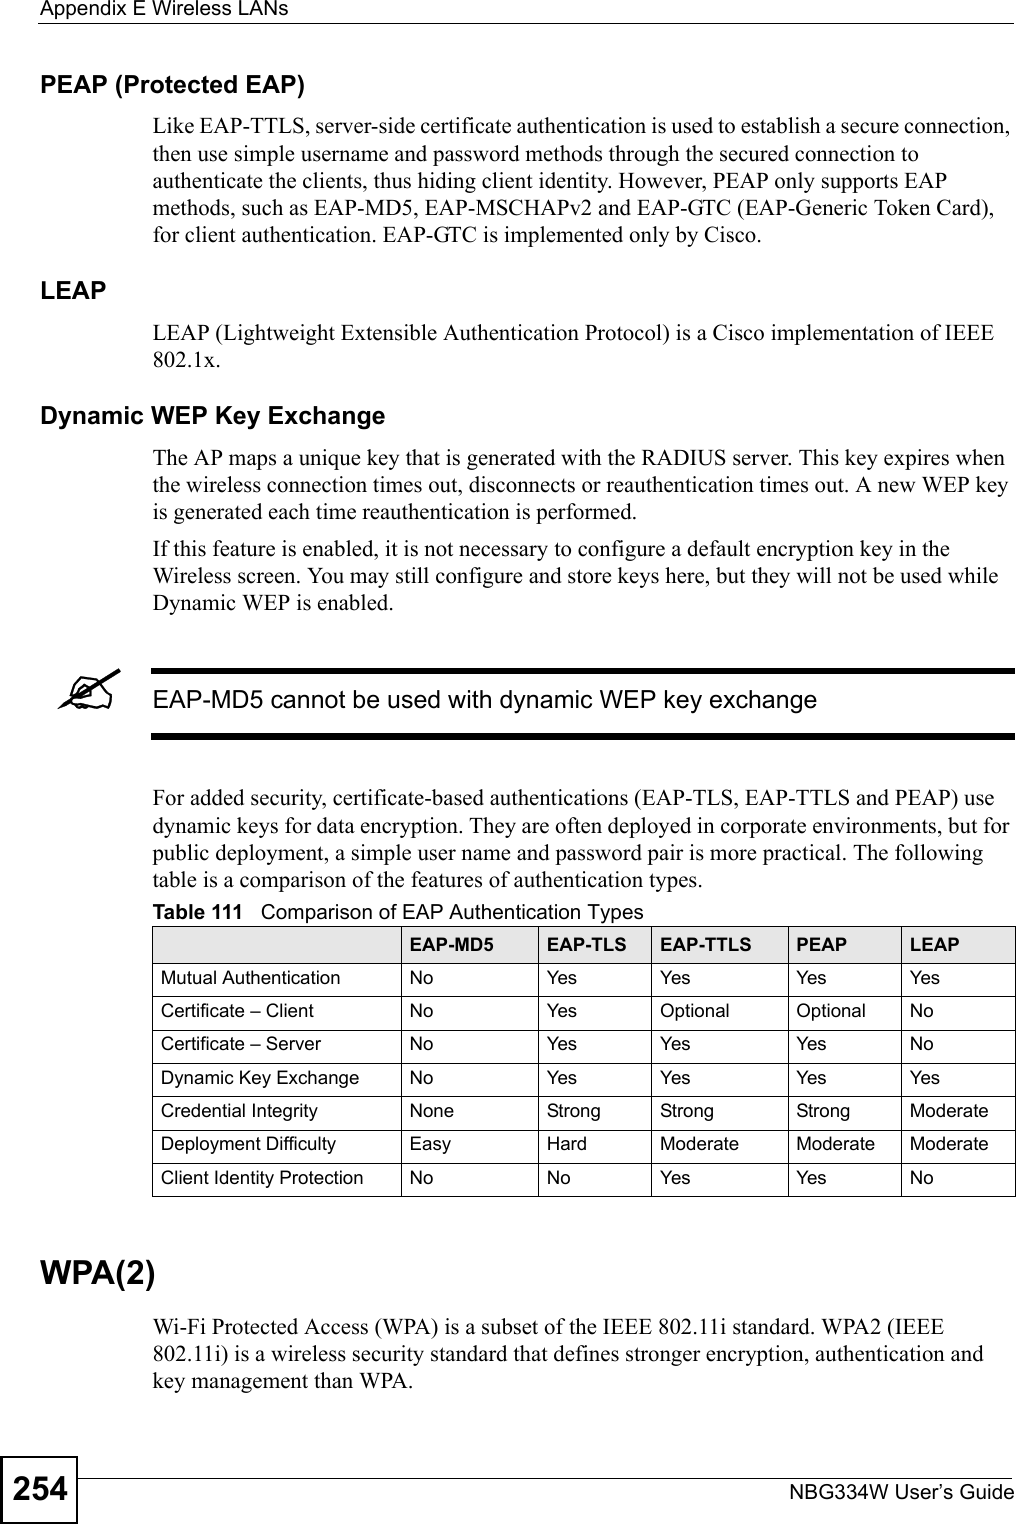 Appendix E Wireless LANsNBG334W User’s Guide254PEAP (Protected EAP)   Like EAP-TTLS, server-side certificate authentication is used to establish a secure connection, then use simple username and password methods through the secured connection to authenticate the clients, thus hiding client identity. However, PEAP only supports EAP methods, such as EAP-MD5, EAP-MSCHAPv2 and EAP-GTC (EAP-Generic Token Card), for client authentication. EAP-GTC is implemented only by Cisco.LEAPLEAP (Lightweight Extensible Authentication Protocol) is a Cisco implementation of IEEE 802.1x. Dynamic WEP Key ExchangeThe AP maps a unique key that is generated with the RADIUS server. This key expires when the wireless connection times out, disconnects or reauthentication times out. A new WEP key is generated each time reauthentication is performed.If this feature is enabled, it is not necessary to configure a default encryption key in the Wireless screen. You may still configure and store keys here, but they will not be used while Dynamic WEP is enabled.&quot;EAP-MD5 cannot be used with dynamic WEP key exchangeFor added security, certificate-based authentications (EAP-TLS, EAP-TTLS and PEAP) use dynamic keys for data encryption. They are often deployed in corporate environments, but for public deployment, a simple user name and password pair is more practical. The following table is a comparison of the features of authentication types.WPA(2)Wi-Fi Protected Access (WPA) is a subset of the IEEE 802.11i standard. WPA2 (IEEE 802.11i) is a wireless security standard that defines stronger encryption, authentication and key management than WPA. Table 111   Comparison of EAP Authentication TypesEAP-MD5 EAP-TLS EAP-TTLS PEAP LEAPMutual Authentication No Yes Yes Yes YesCertificate – Client No Yes Optional Optional NoCertificate – Server No Yes Yes Yes NoDynamic Key Exchange No Yes Yes Yes YesCredential Integrity None Strong Strong Strong ModerateDeployment Difficulty Easy Hard Moderate Moderate ModerateClient Identity Protection No No Yes Yes No